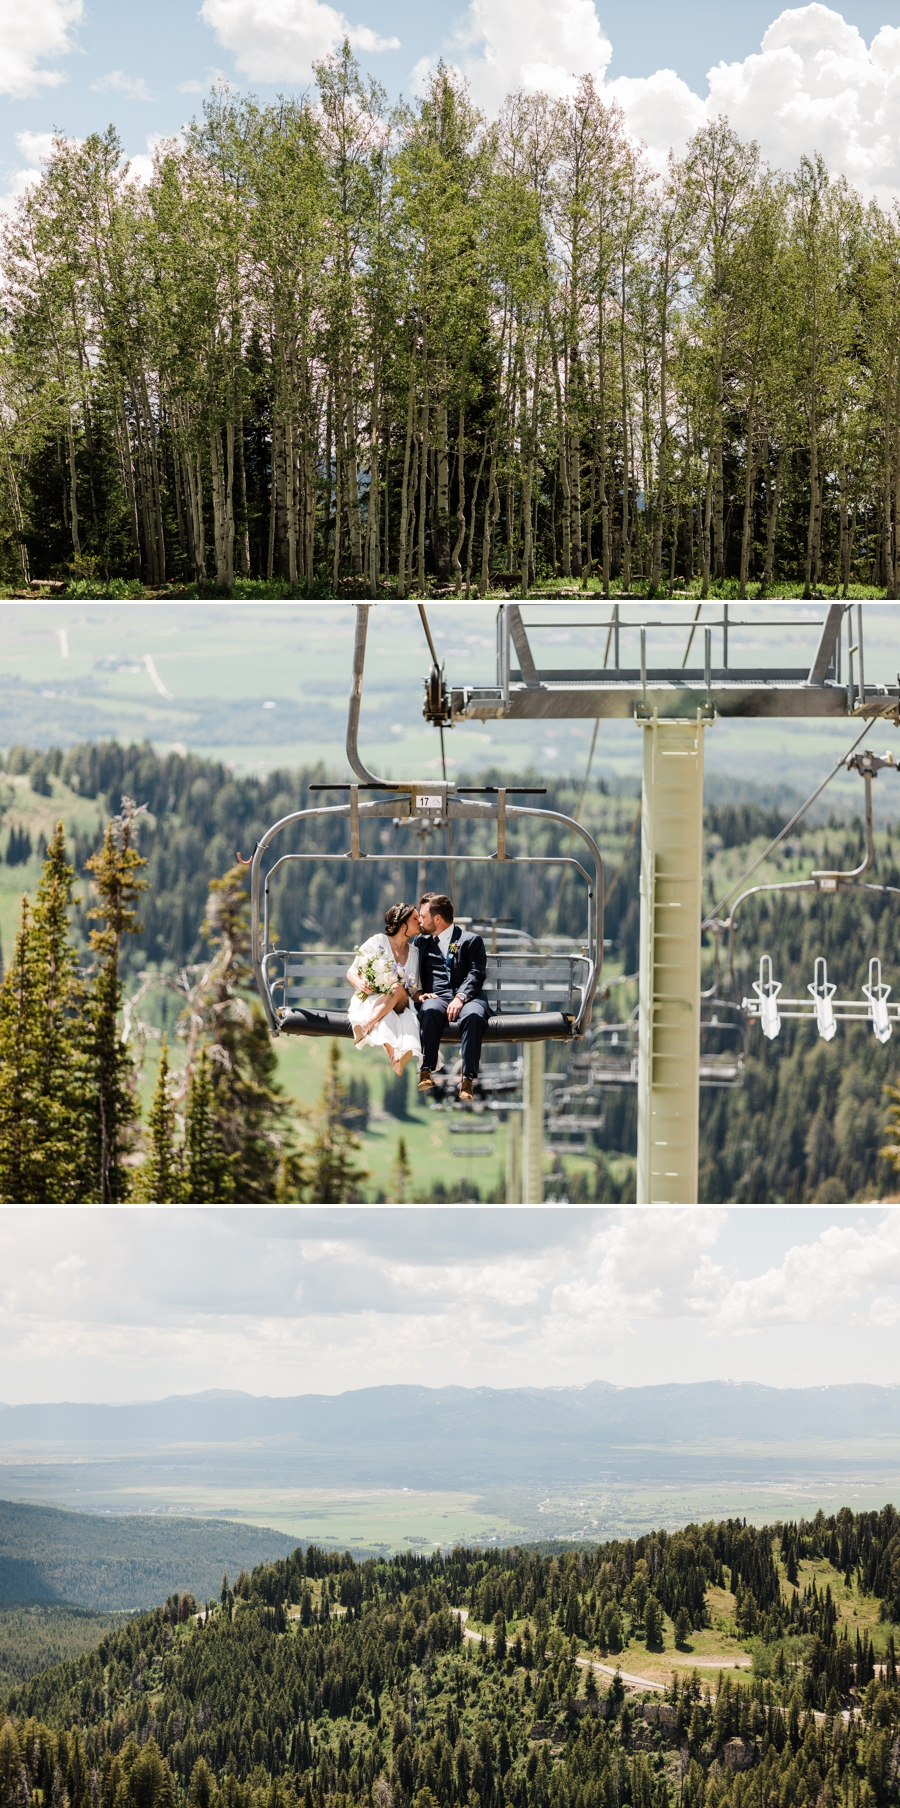 Bride and groom ride the chairlift at Grand Targhee Resort by Jackson Hole wedding photographer Amy Galbraith